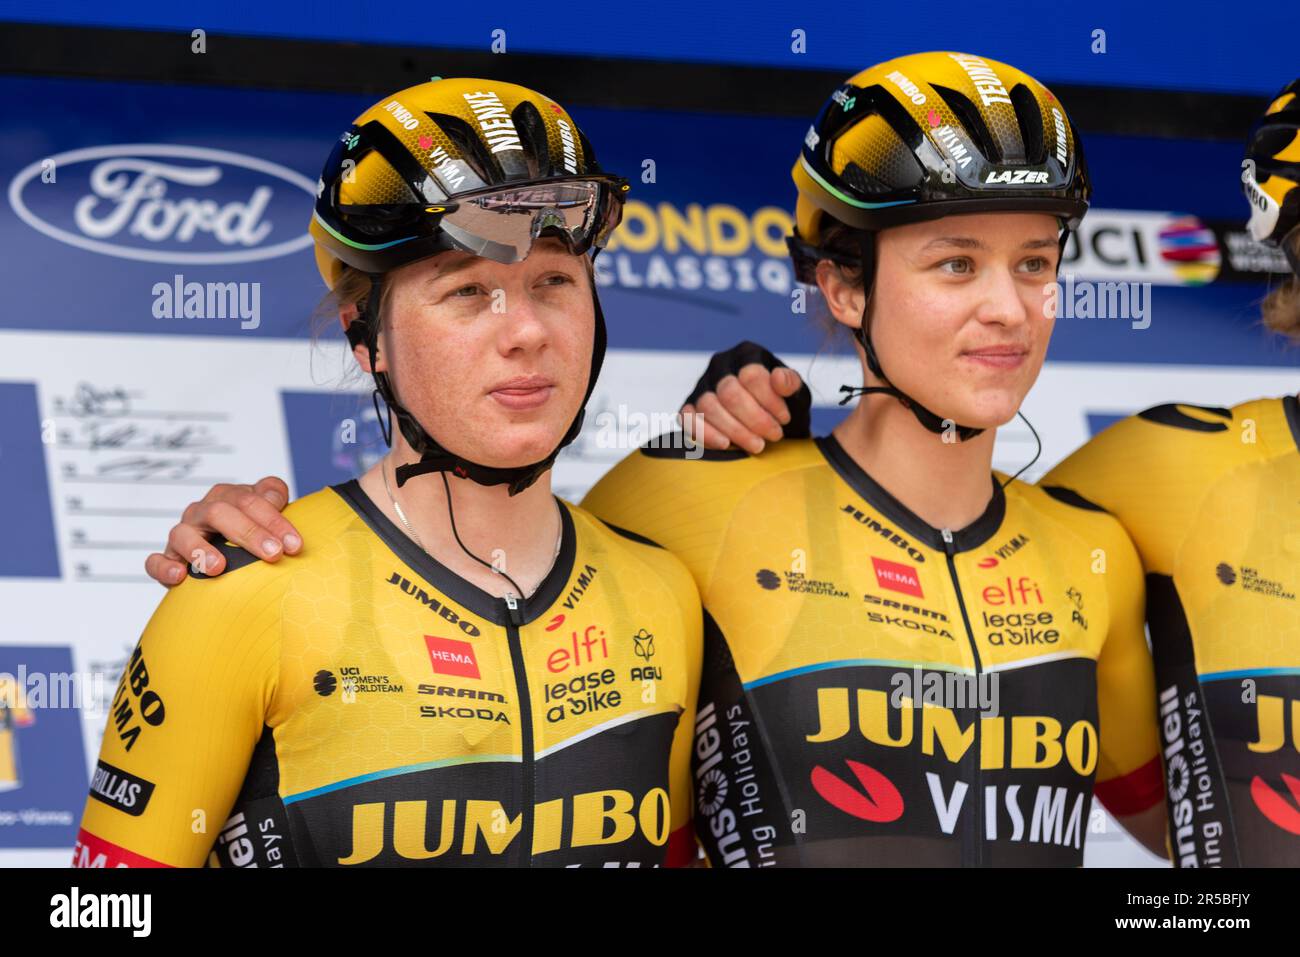 Team Jumbo Visma riders at Classique UCI Women's WorldTour road race Stage 3, 2023 Ford RideLondon cycling event. Nienke Veenhoven, Teuntje Beekhuis Stock Photo